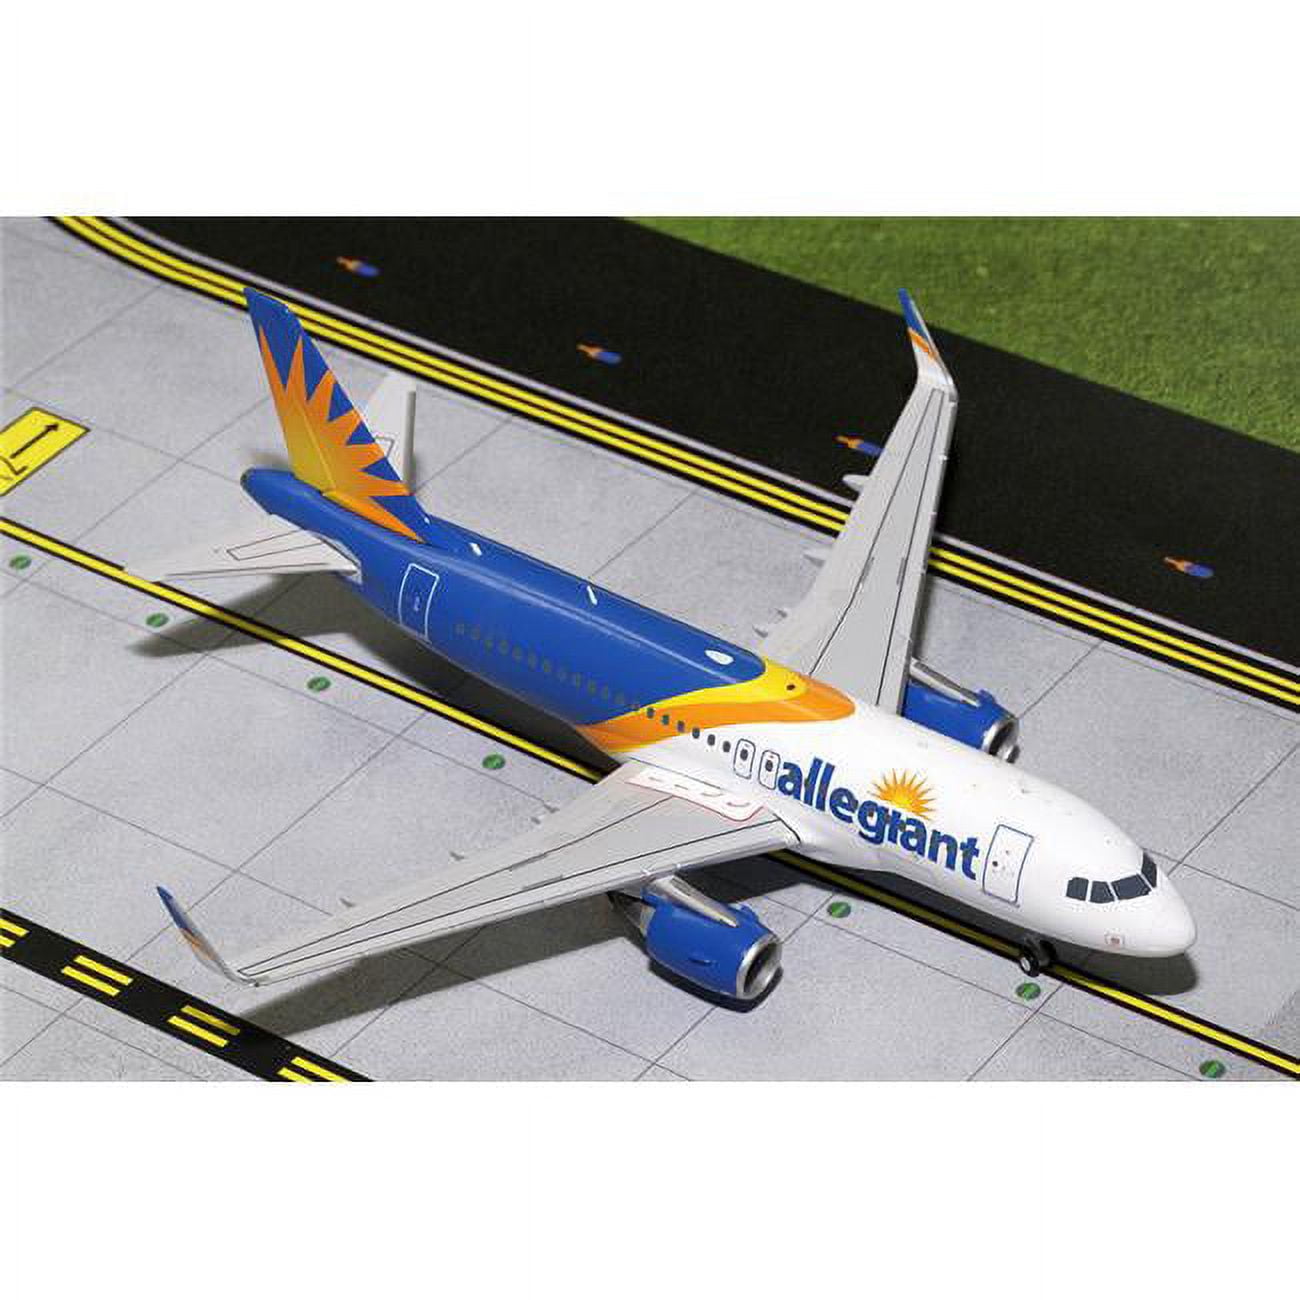 G2aay663 Allegiant A319s 1-200 New Livery Model Airplane